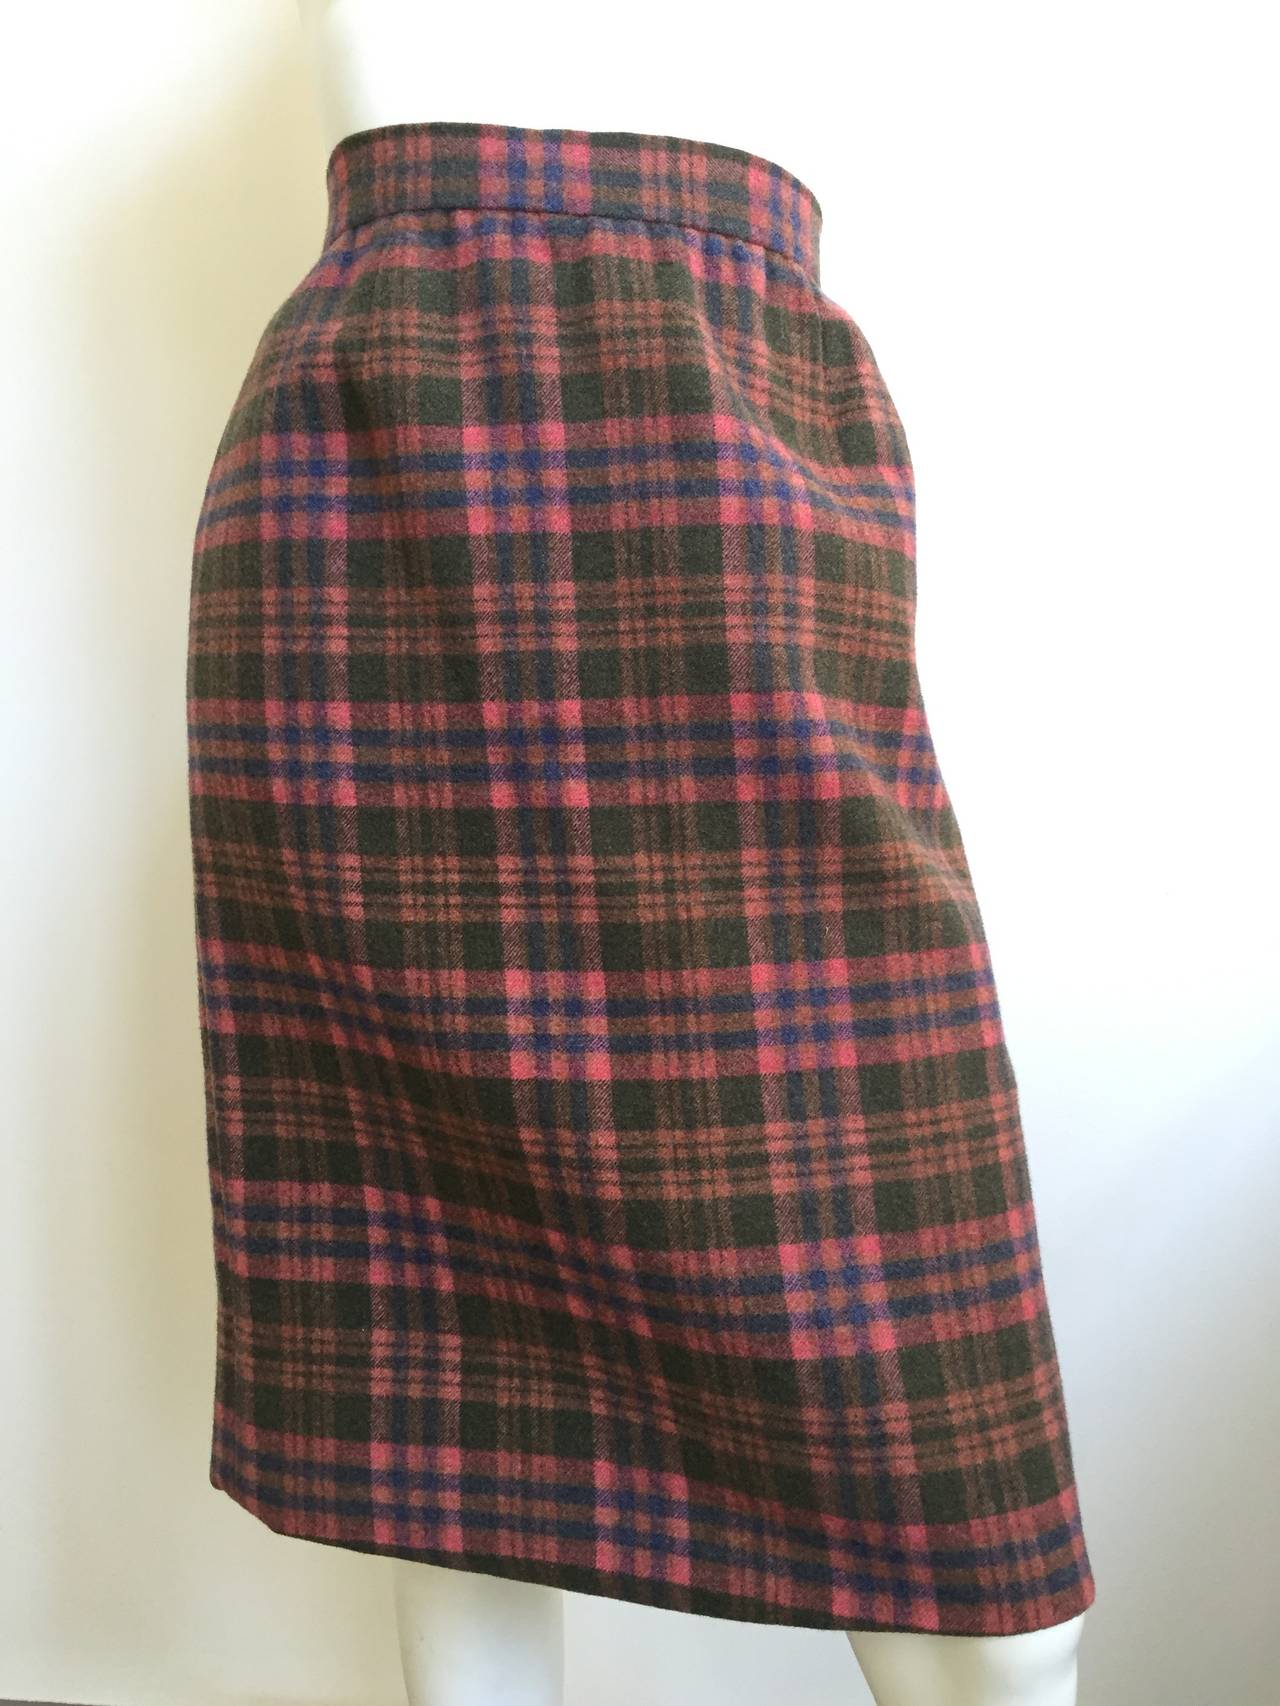 Bill Blass for Saks Fifth Avenue early 1980s thick wool plaid pattern and lined skirt is a USA size 12.  Please see & use the measurements below so that you properly measure your waist & hips so you know Bill would approve. This skirt has no